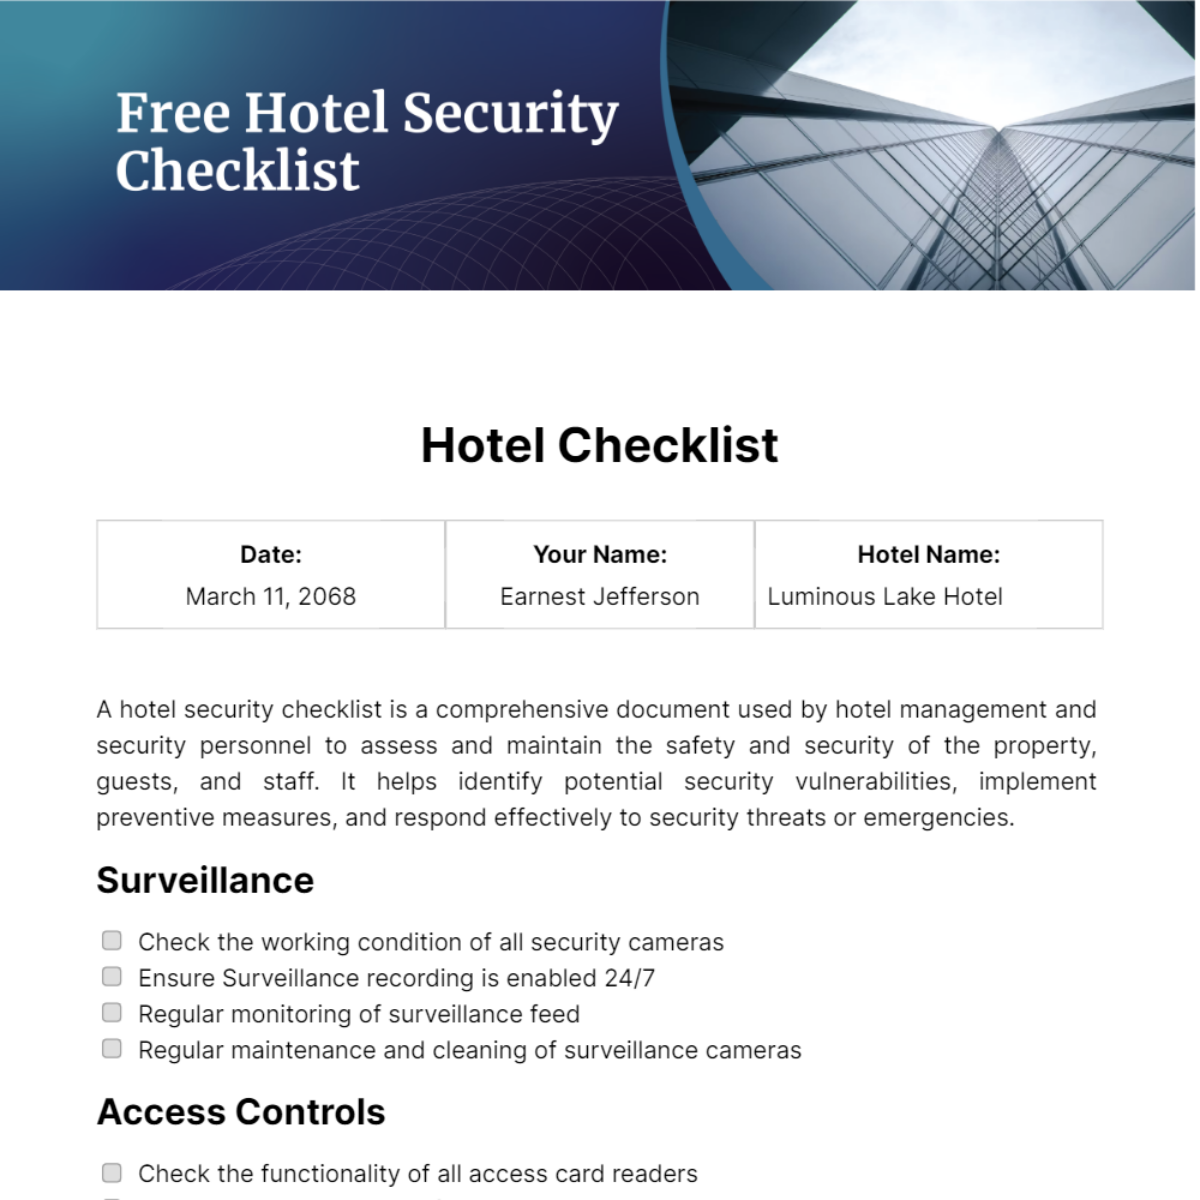 Free Hotel Security Checklist Template